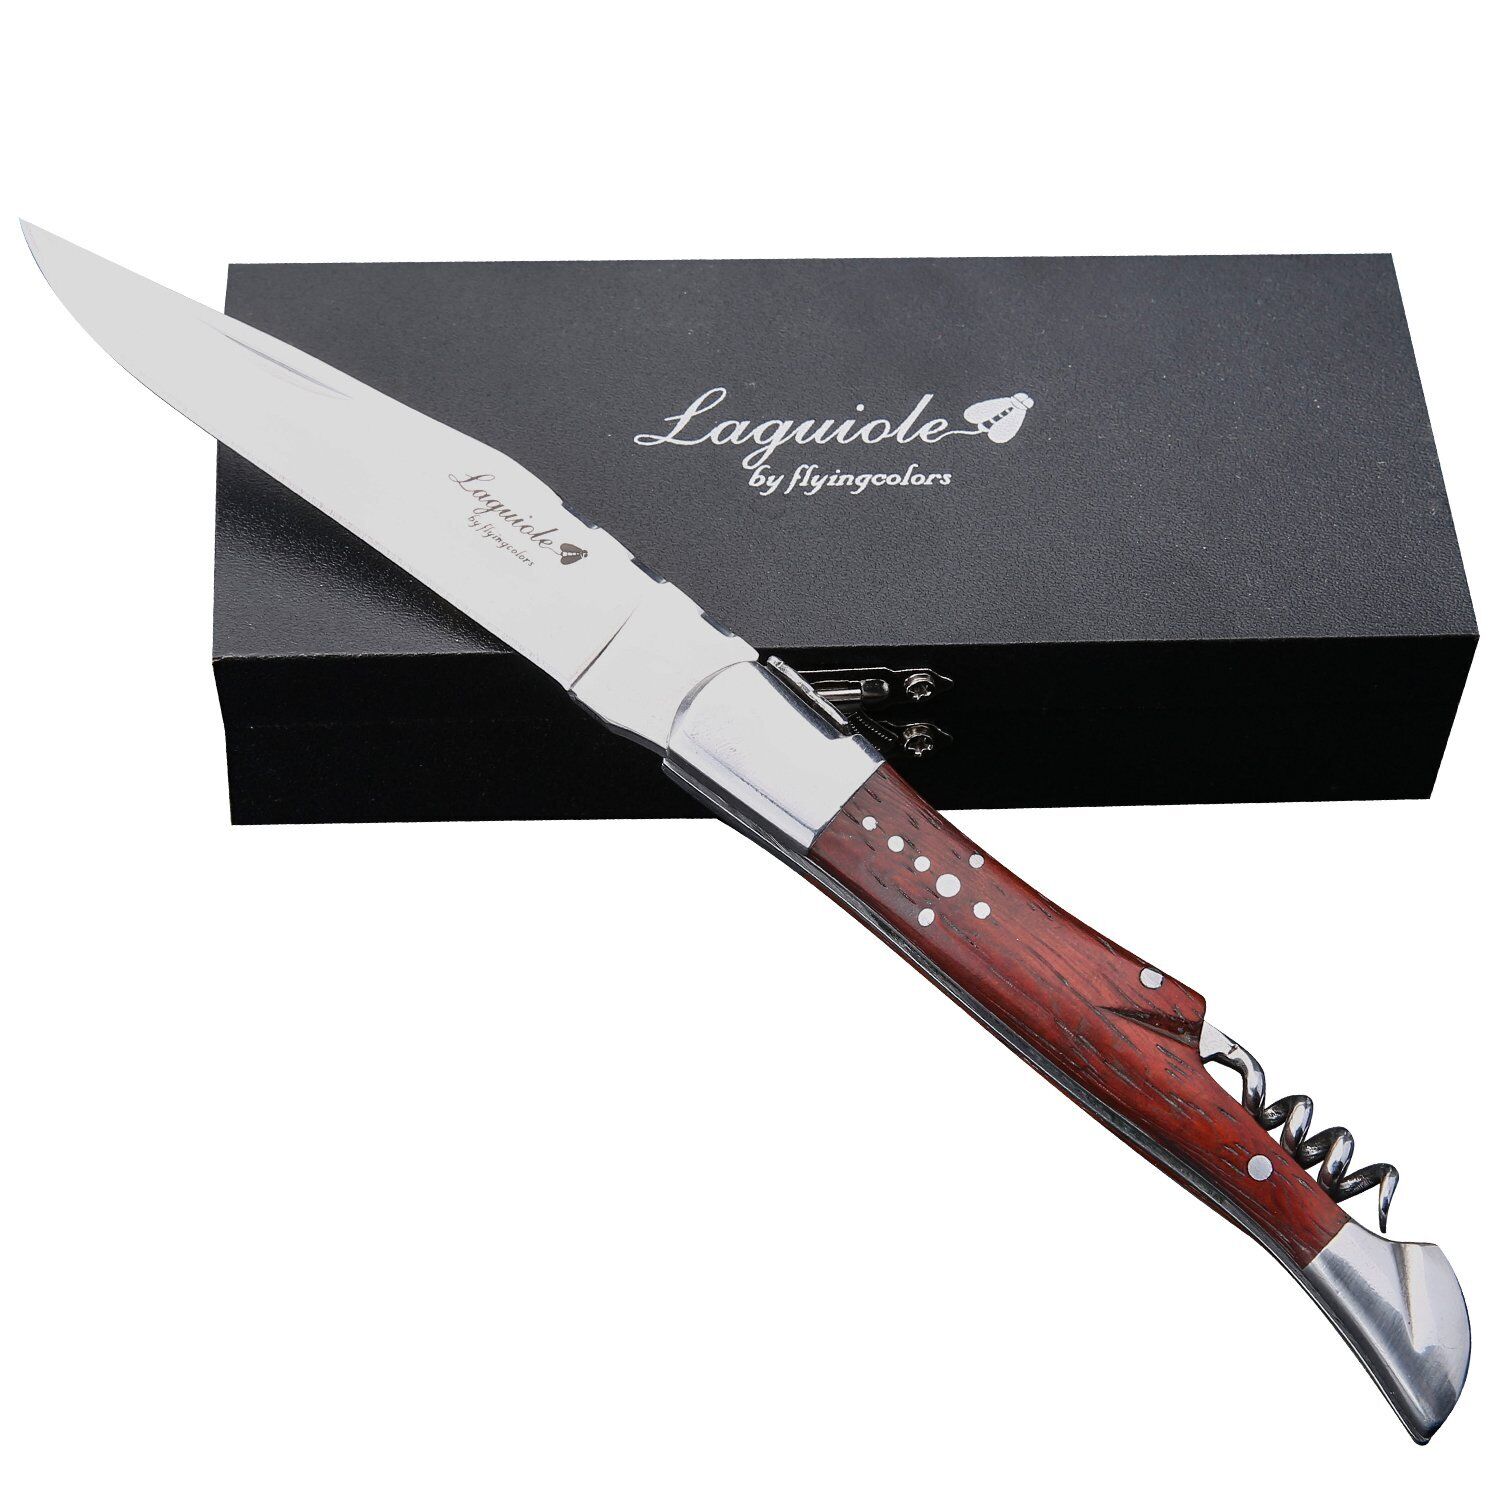 LAGUIOLE BY FLYINGCOLORS Folding Pocket Knife. Stainless Steel, Built in Cork...